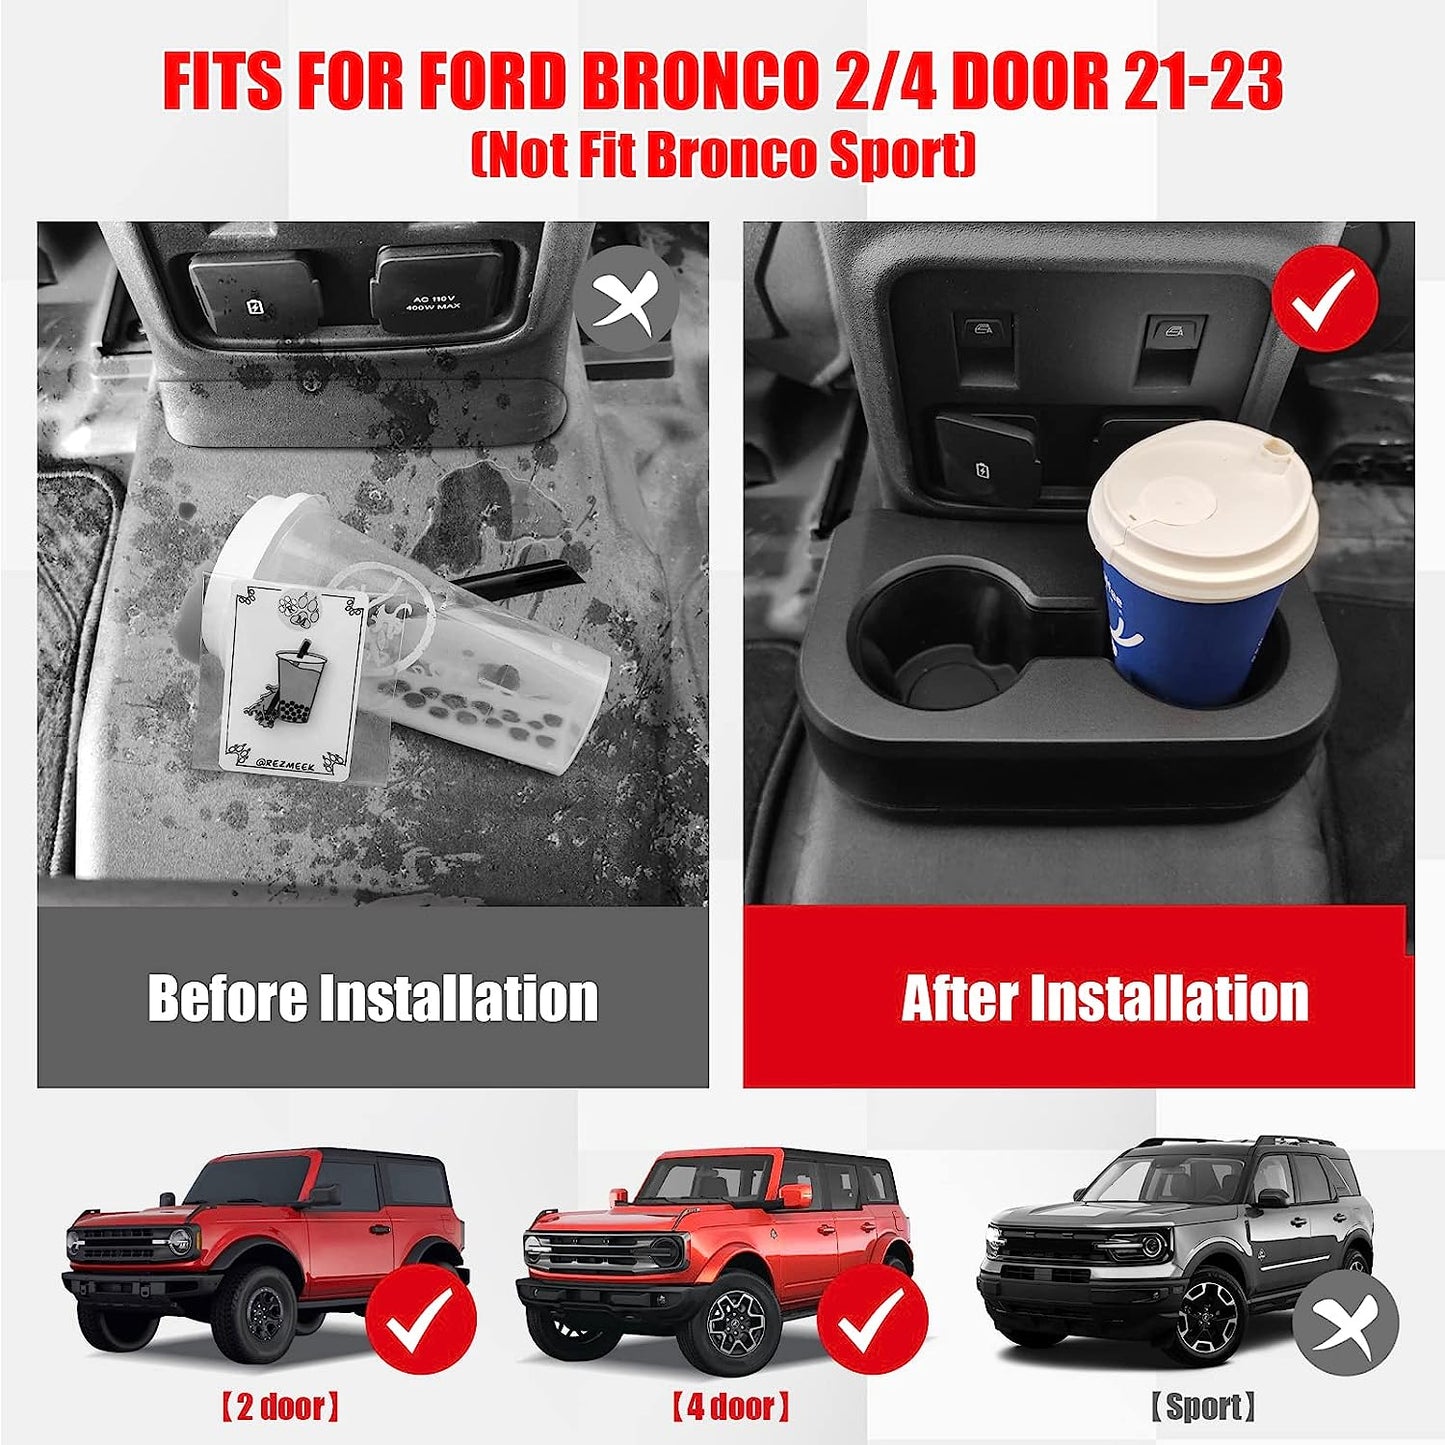 Removable Rear Dual Cup Holder for Ford Bronco 2021 2022 2023 2024